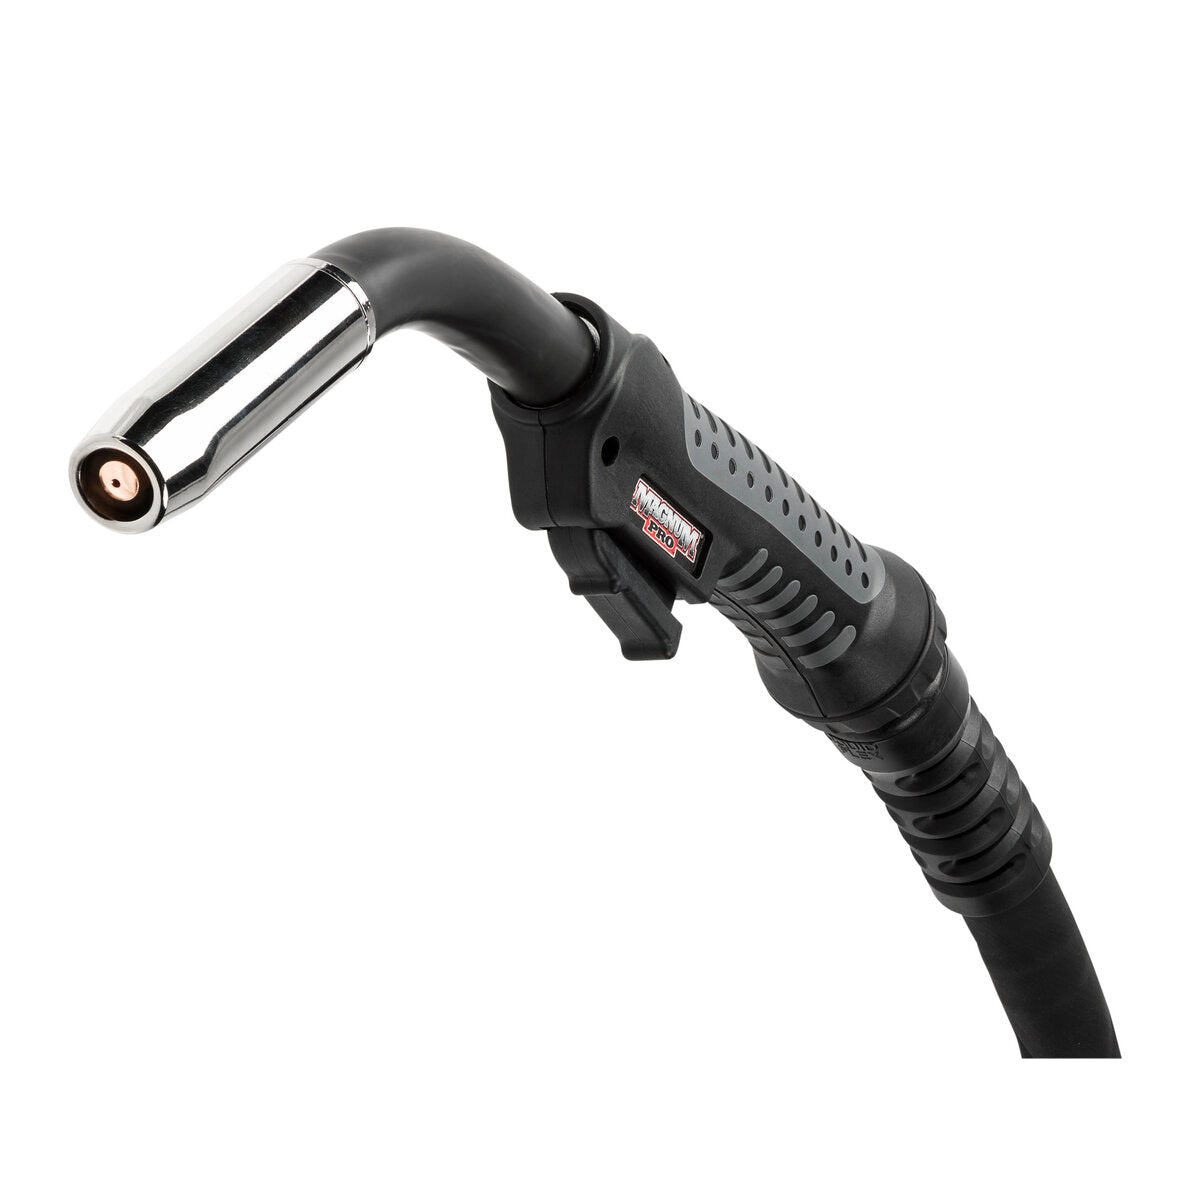 Lincoln Electric - Magnum® PRO 500 Water Cooled Welding Guns - Ext. Length Gun Tube - K4885-2-FM-332